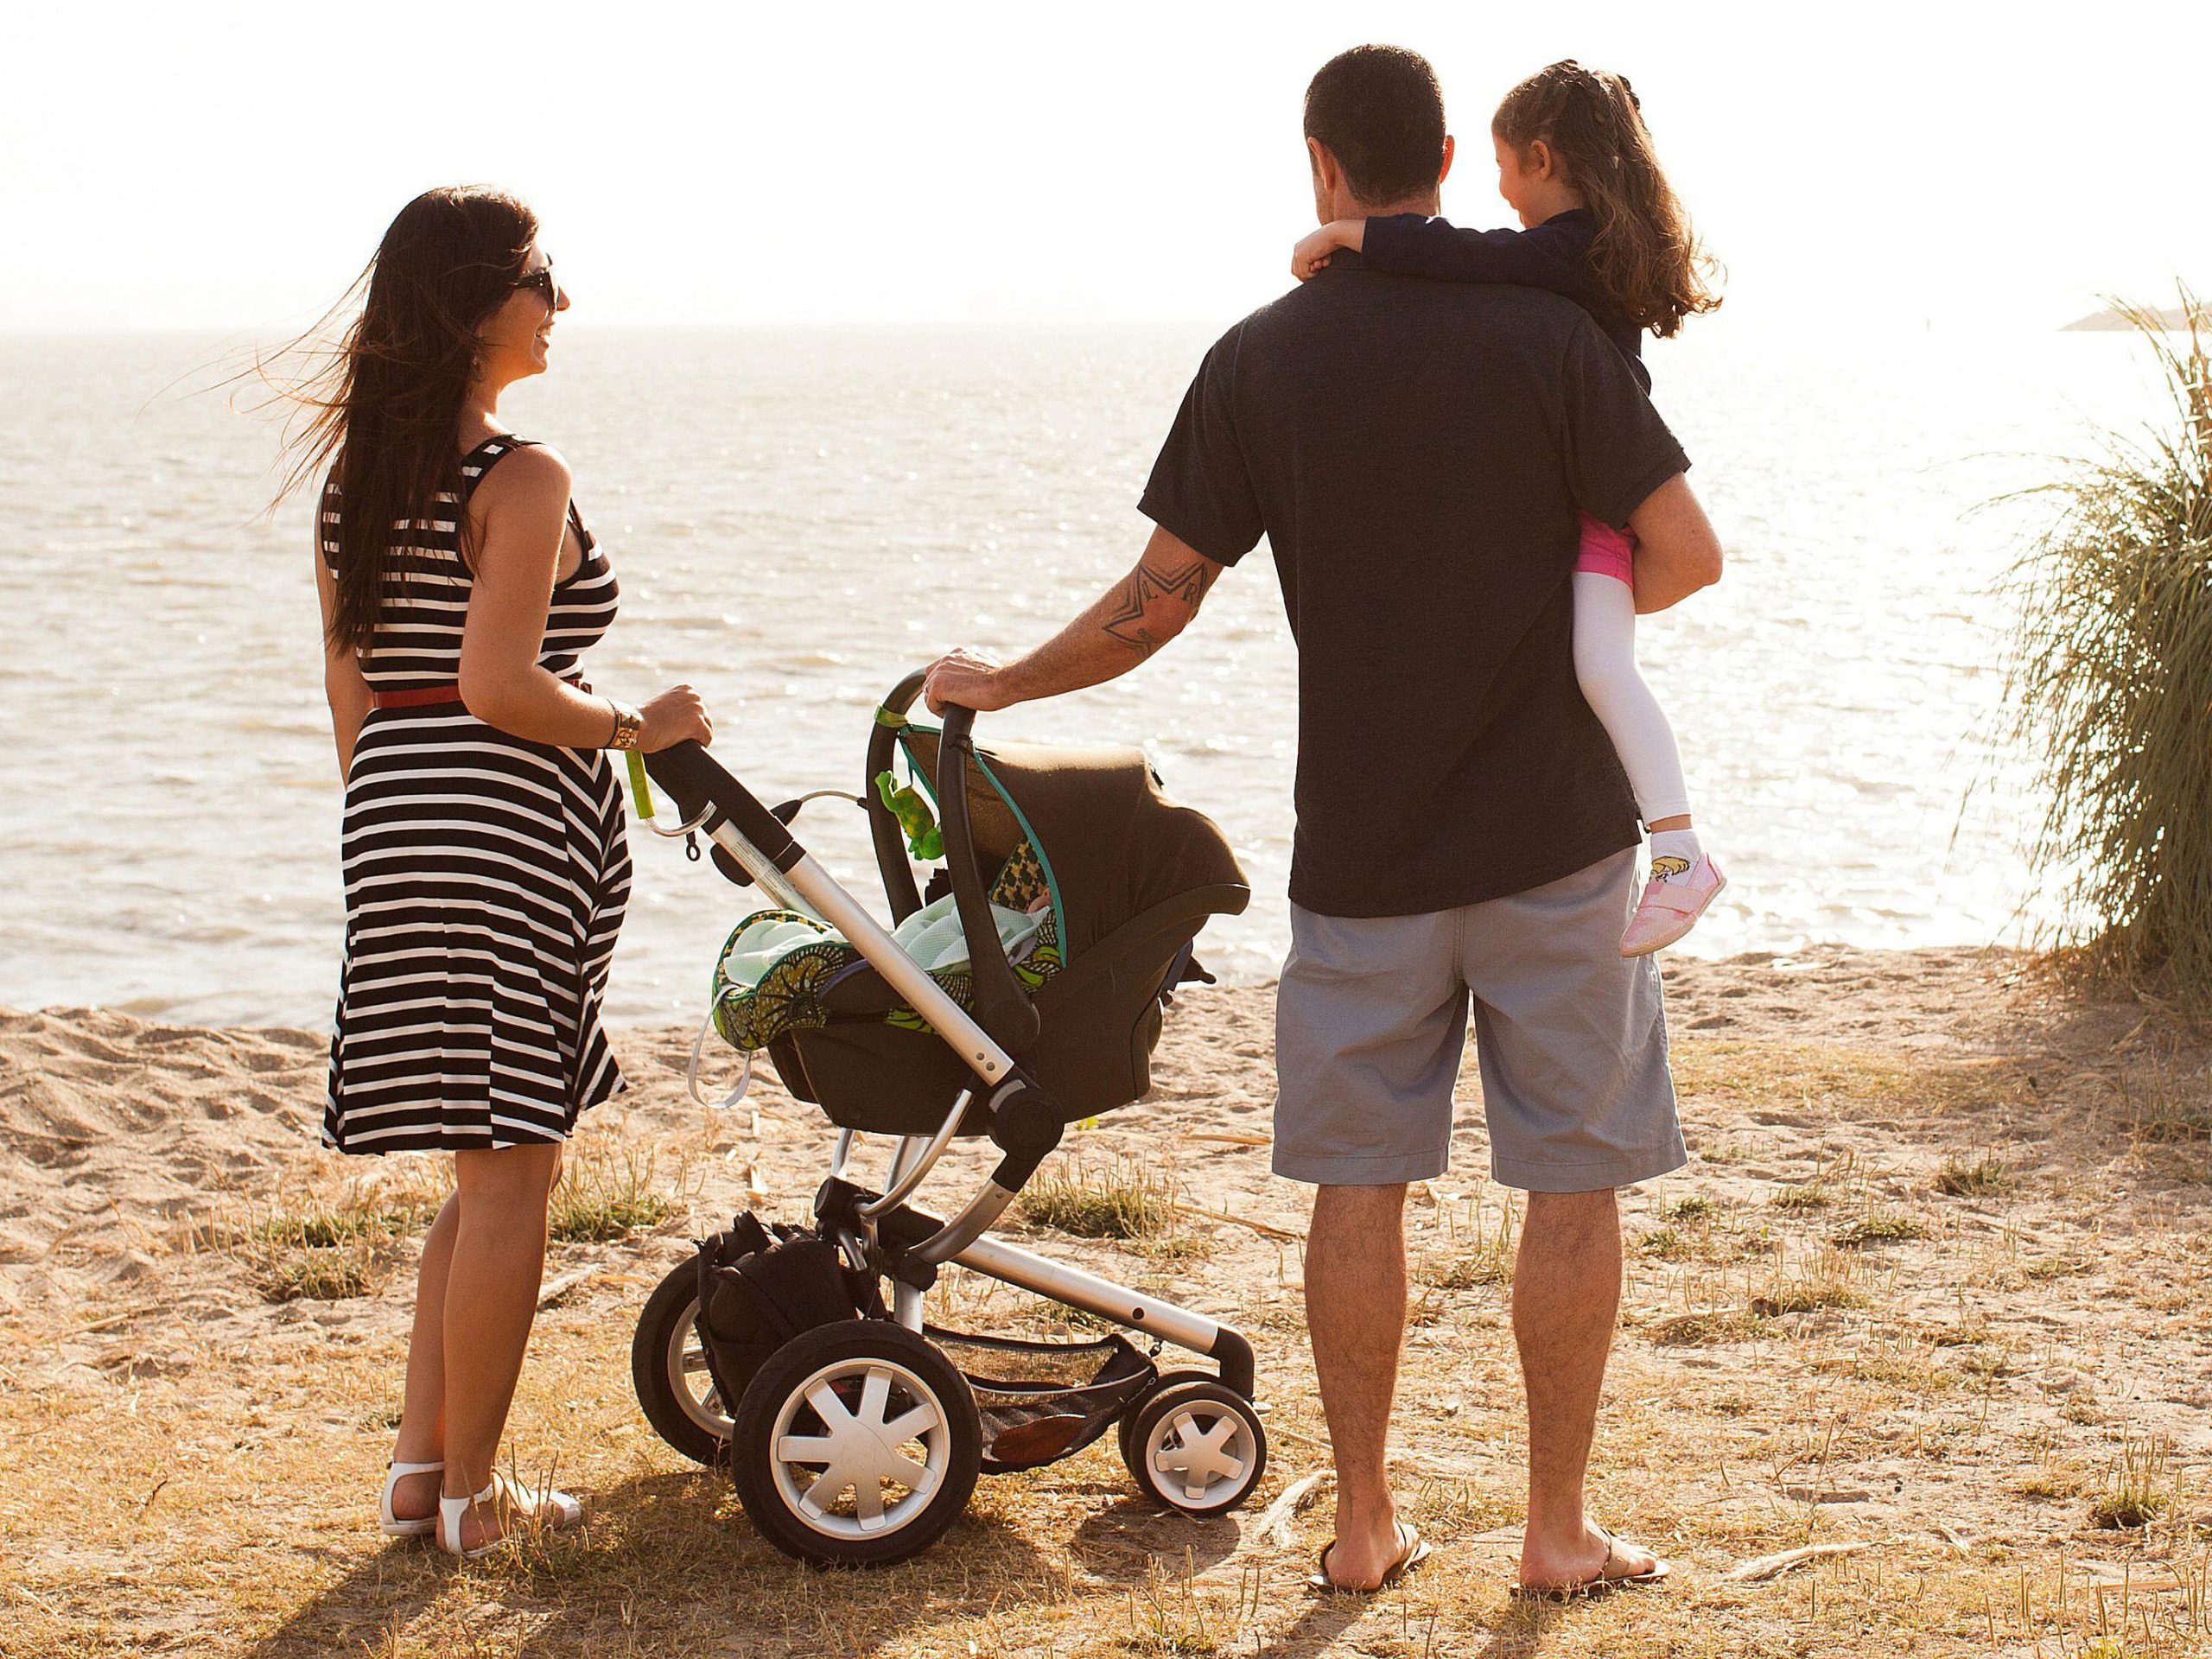 Is It Ok To Bring A Baby Stroller To The Beach? (Few Points To Consider)